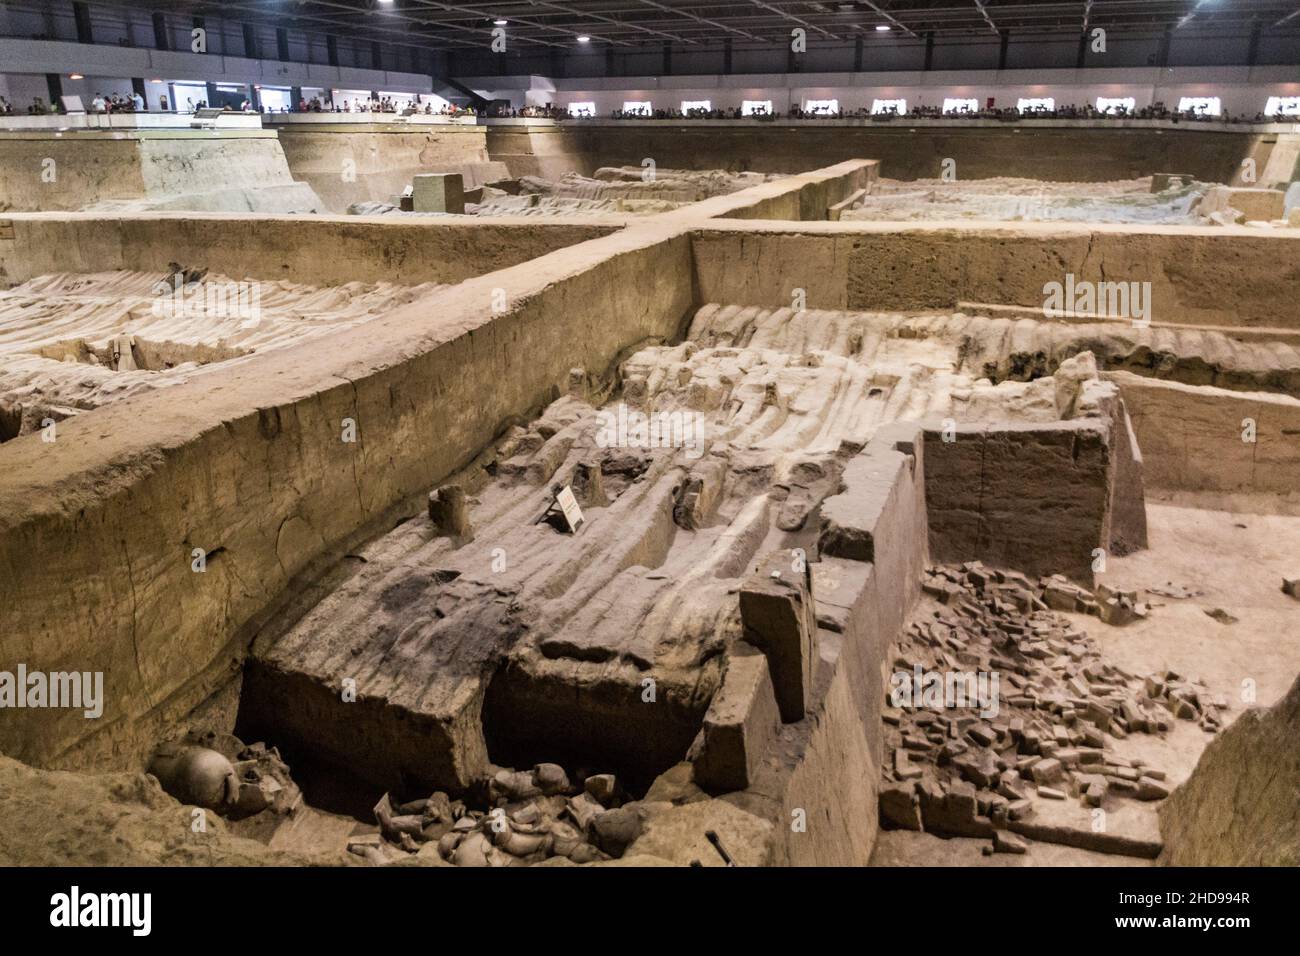 XI'AN, CHINA - AUGUST 6, 2018: View of the Pit 2 of the Army of Terracotta Warriors near Xi'an, Shaanxi province, China Stock Photo